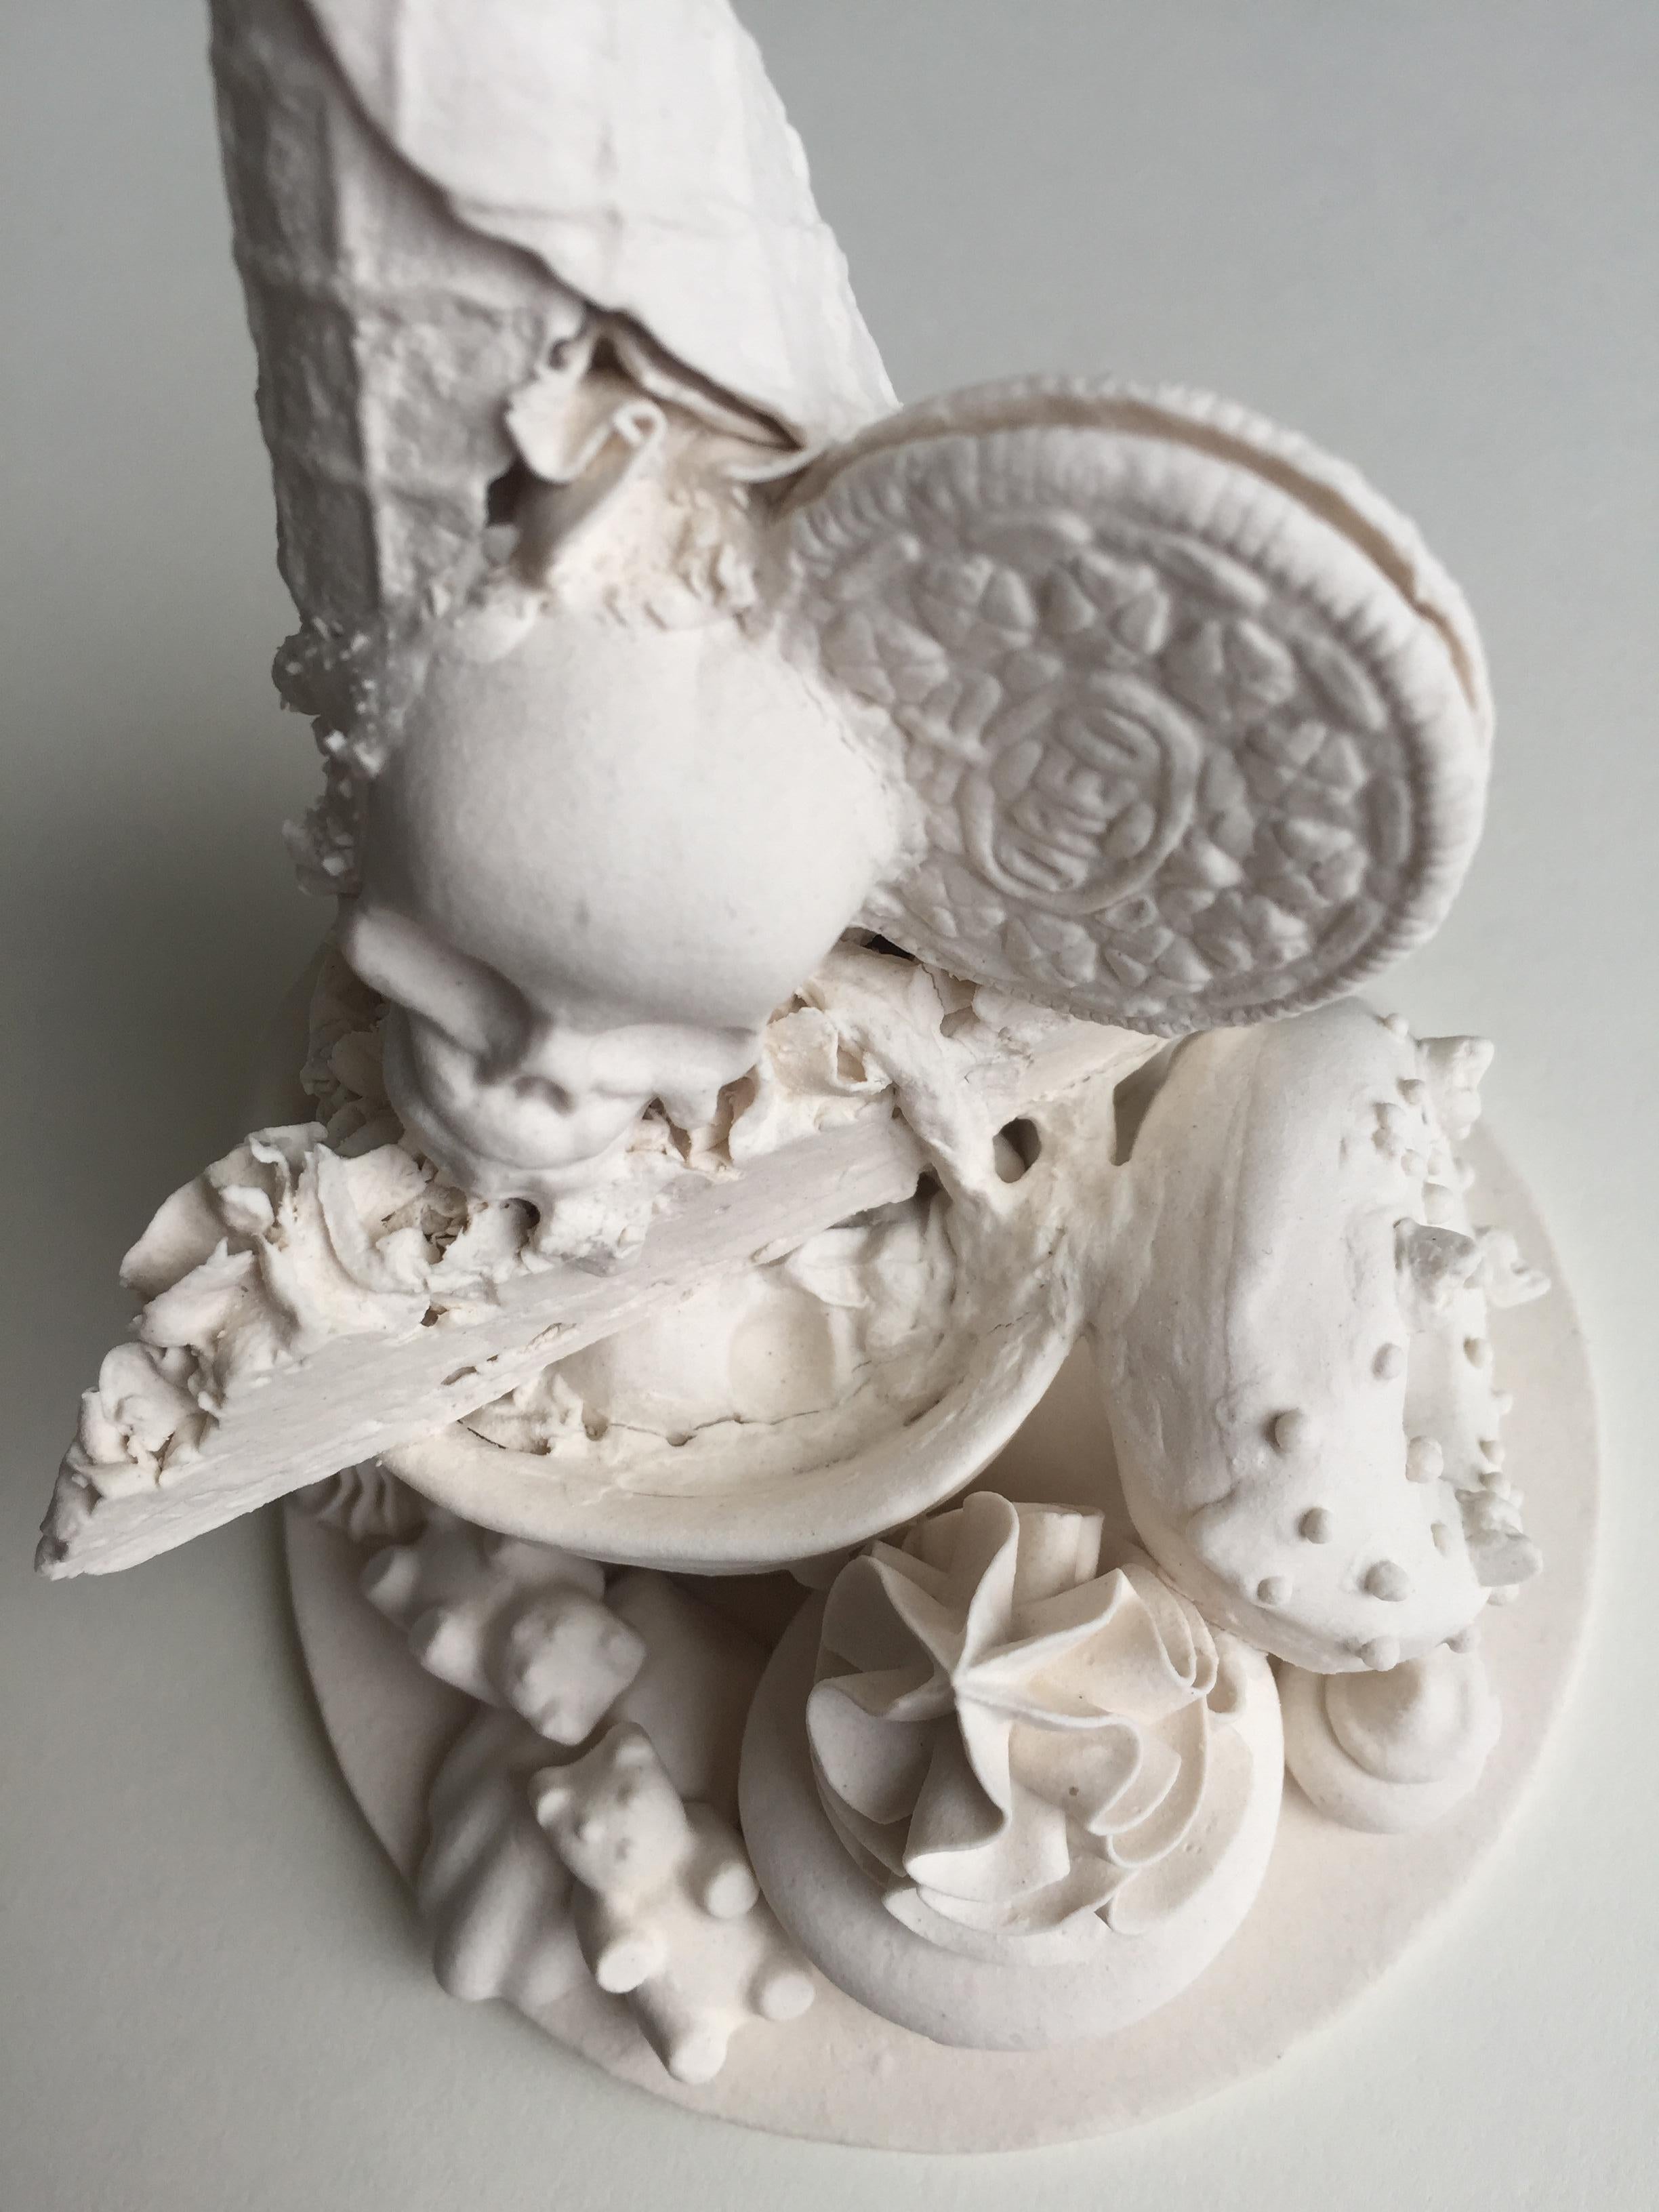 Cookies and Cream - Sculpture by Jacqueline Tse